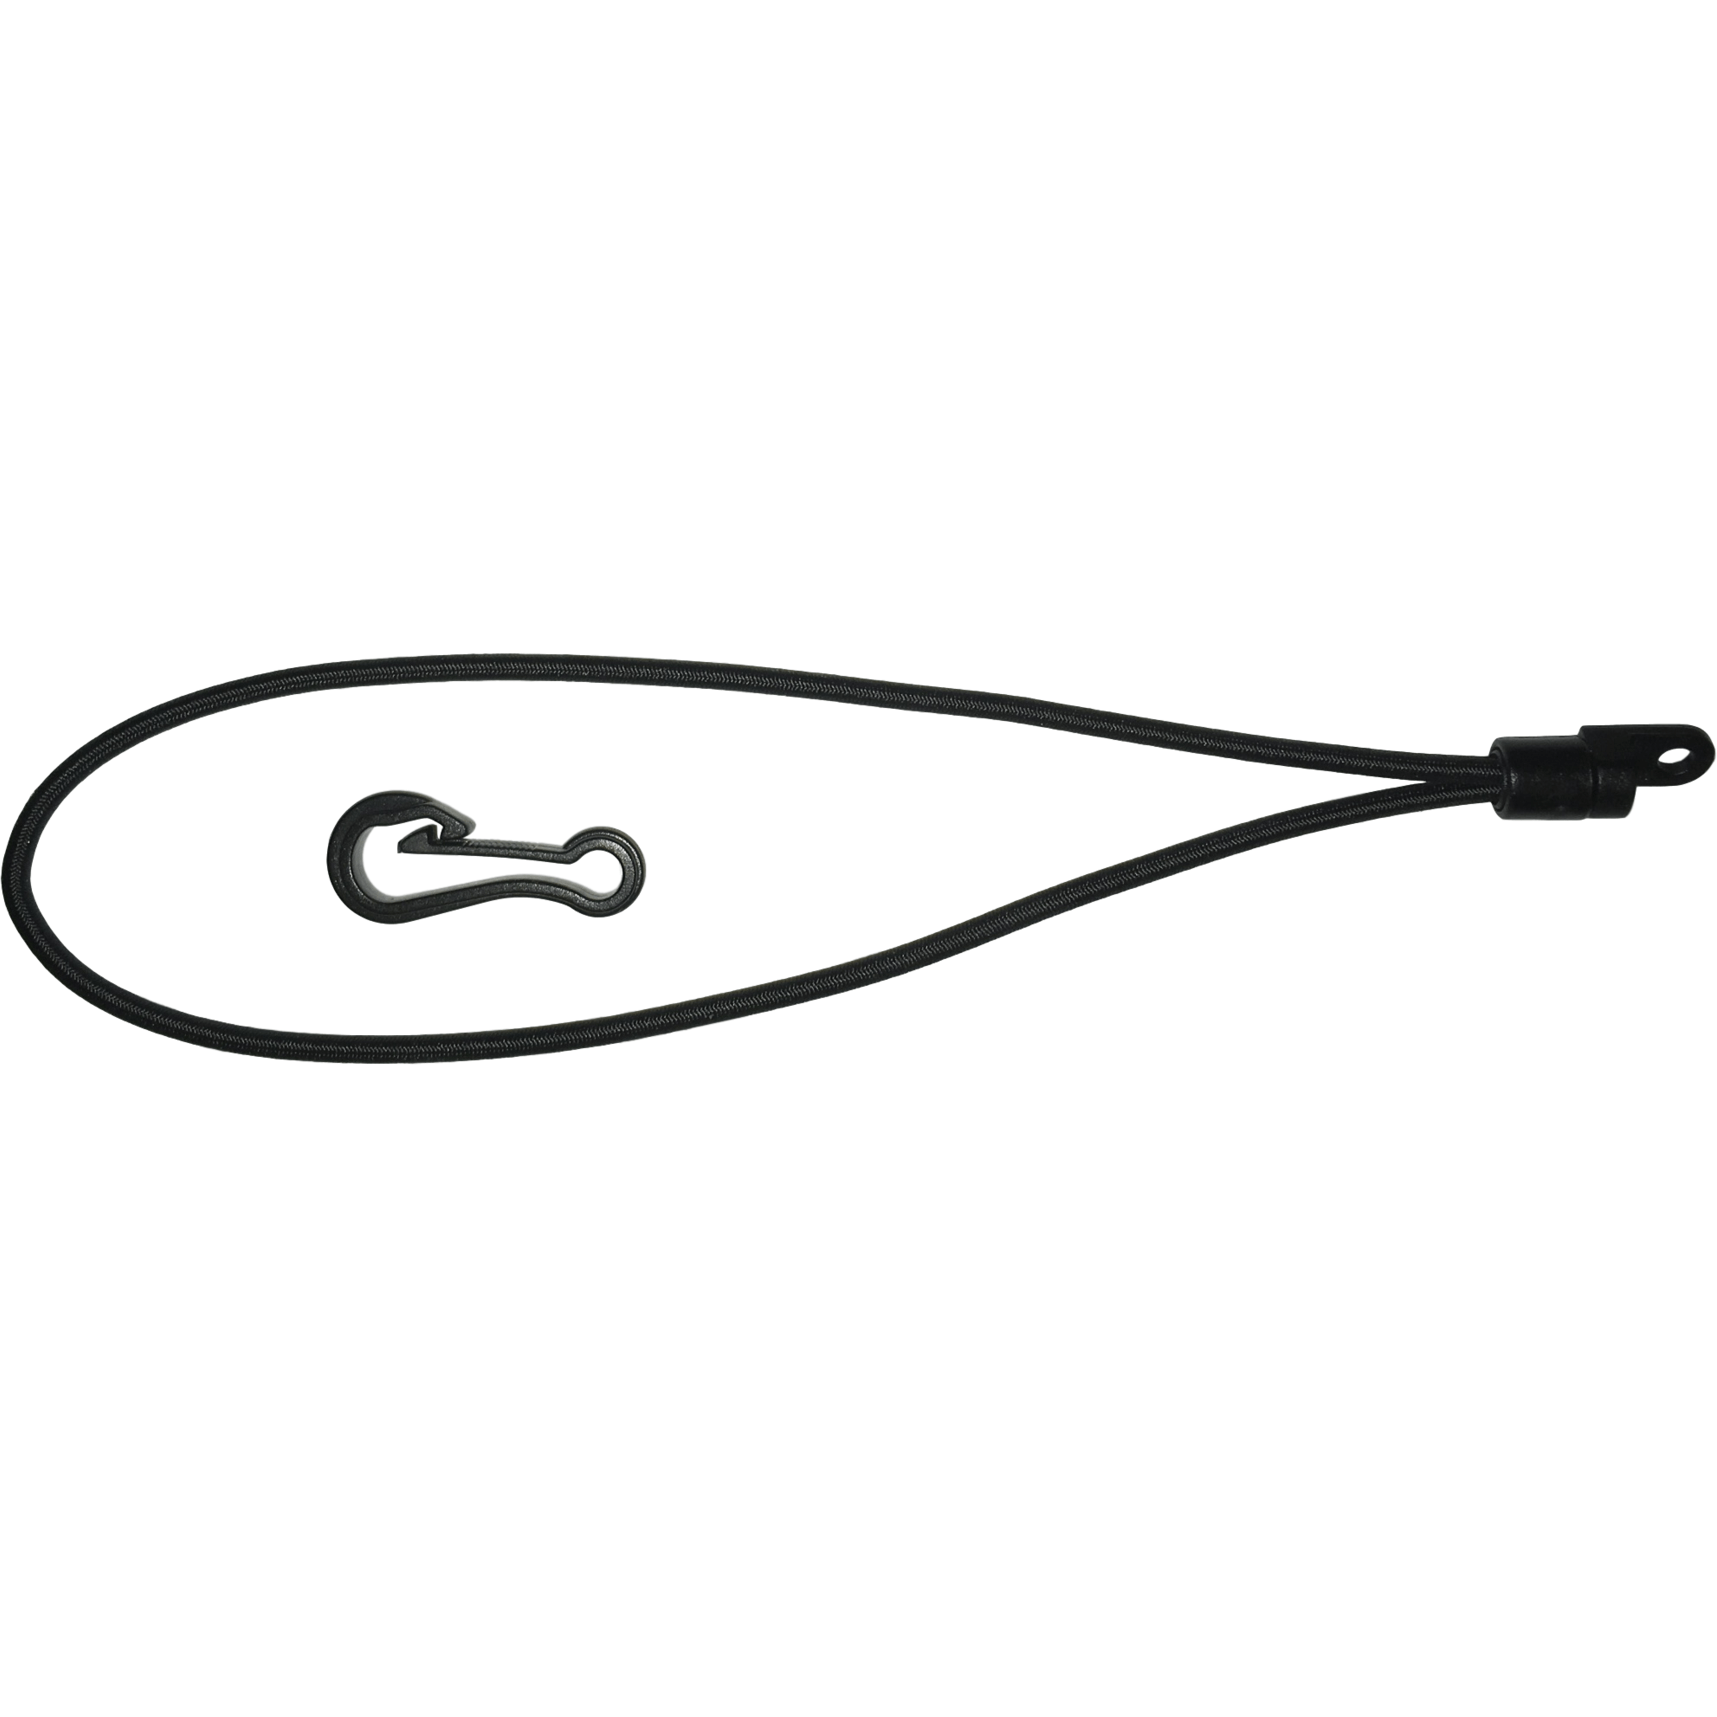 Elastic Mini Hook Loop Tie 4mm Round Bungee Shock Cord in Black Bespoke  Colours & Sizes Available by Kalsi Cords UK Made in Britain -  Canada